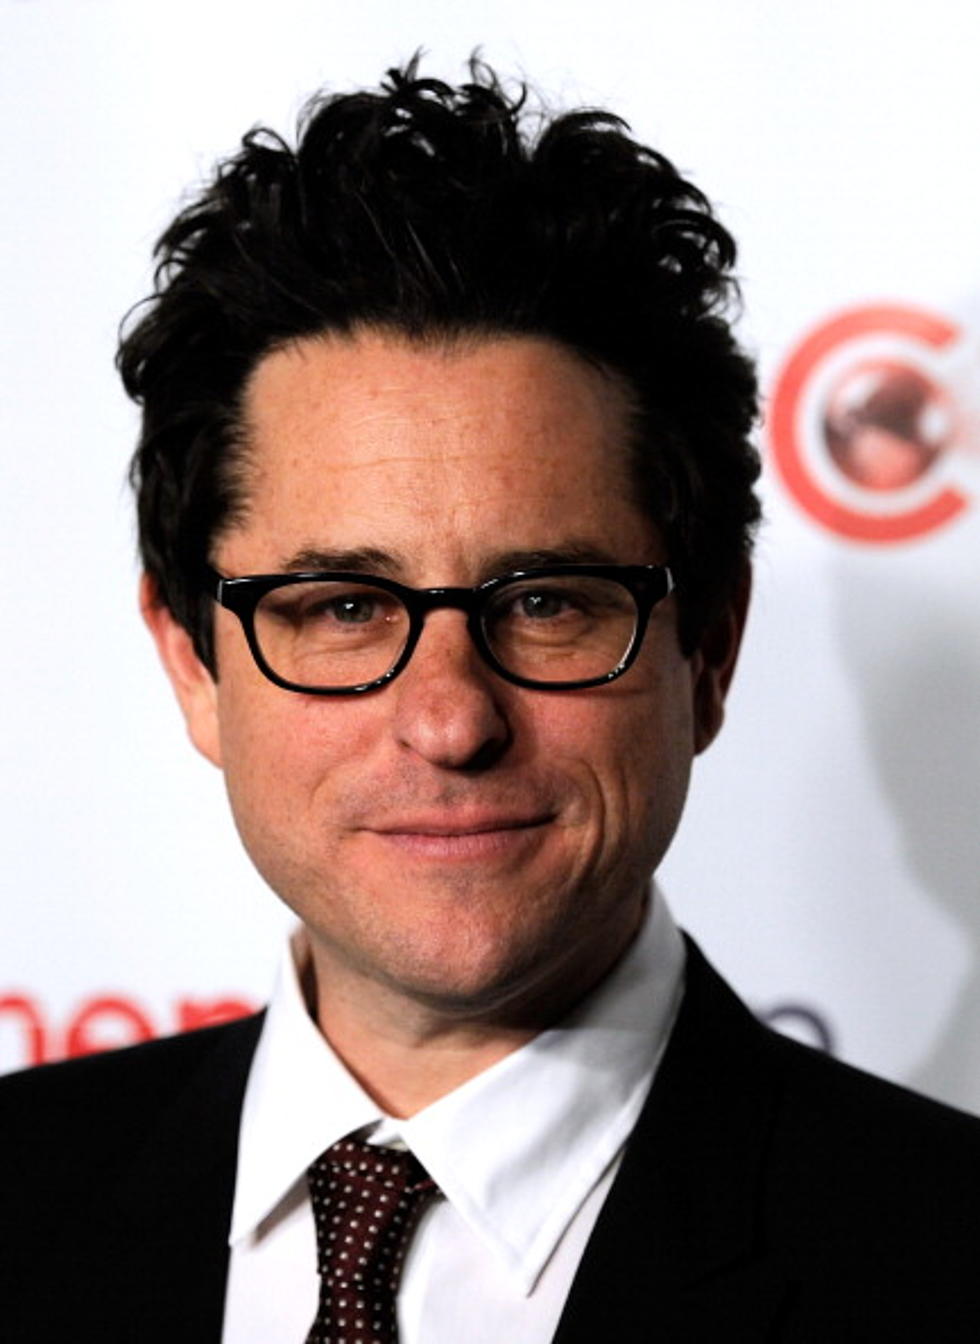 JJ Abrams Has A Top Secret Movie In The Works